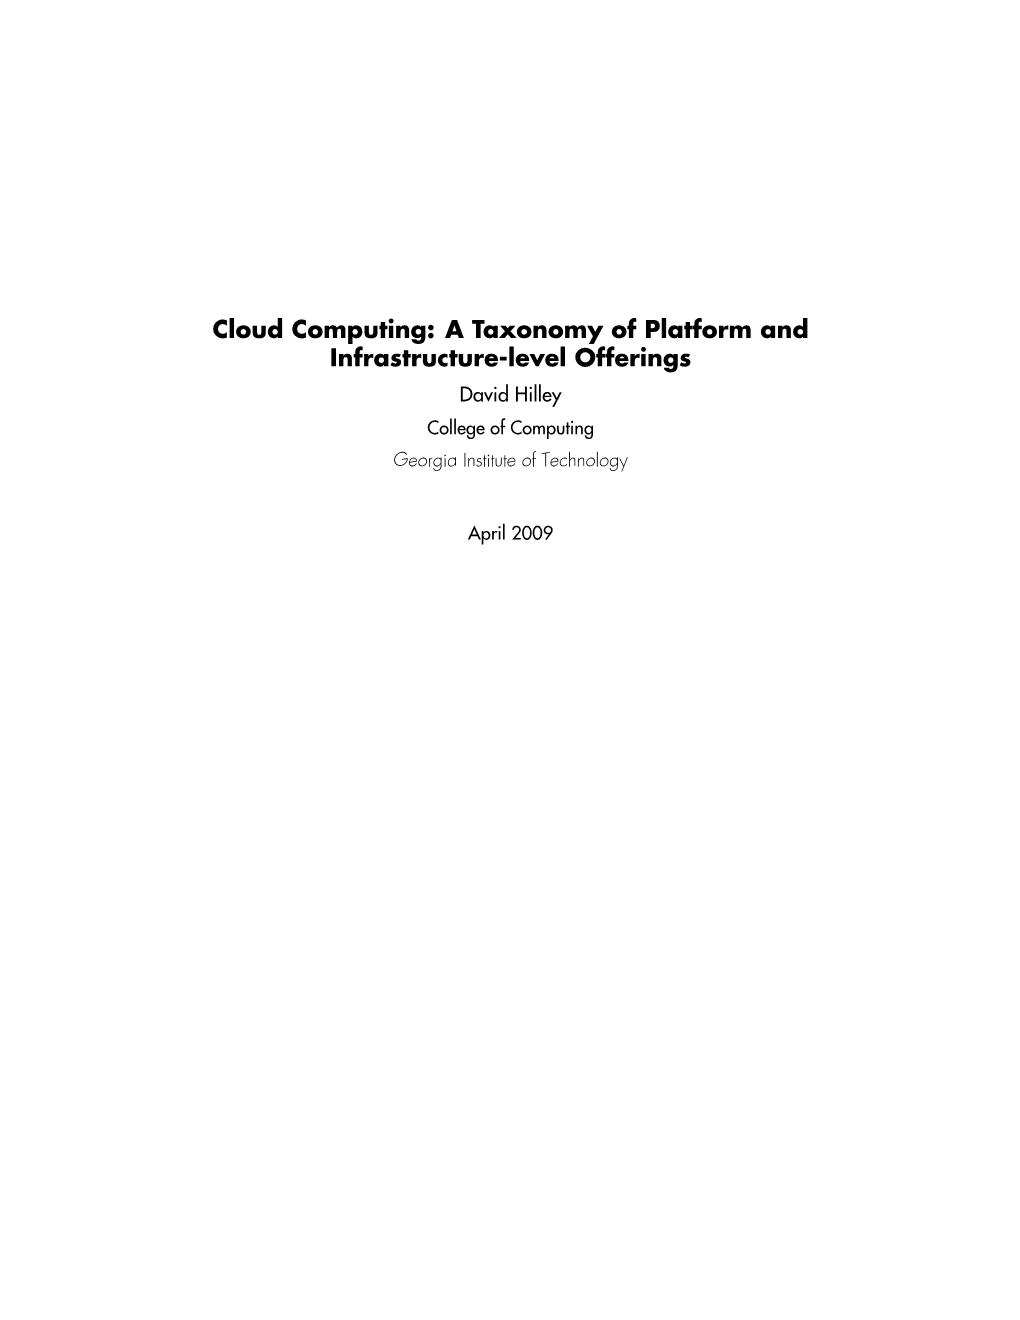 Cloud Computing: a Taxonomy of Platform and Infrastructure-Level Offerings David Hilley College of Computing Georgia Institute of Technology